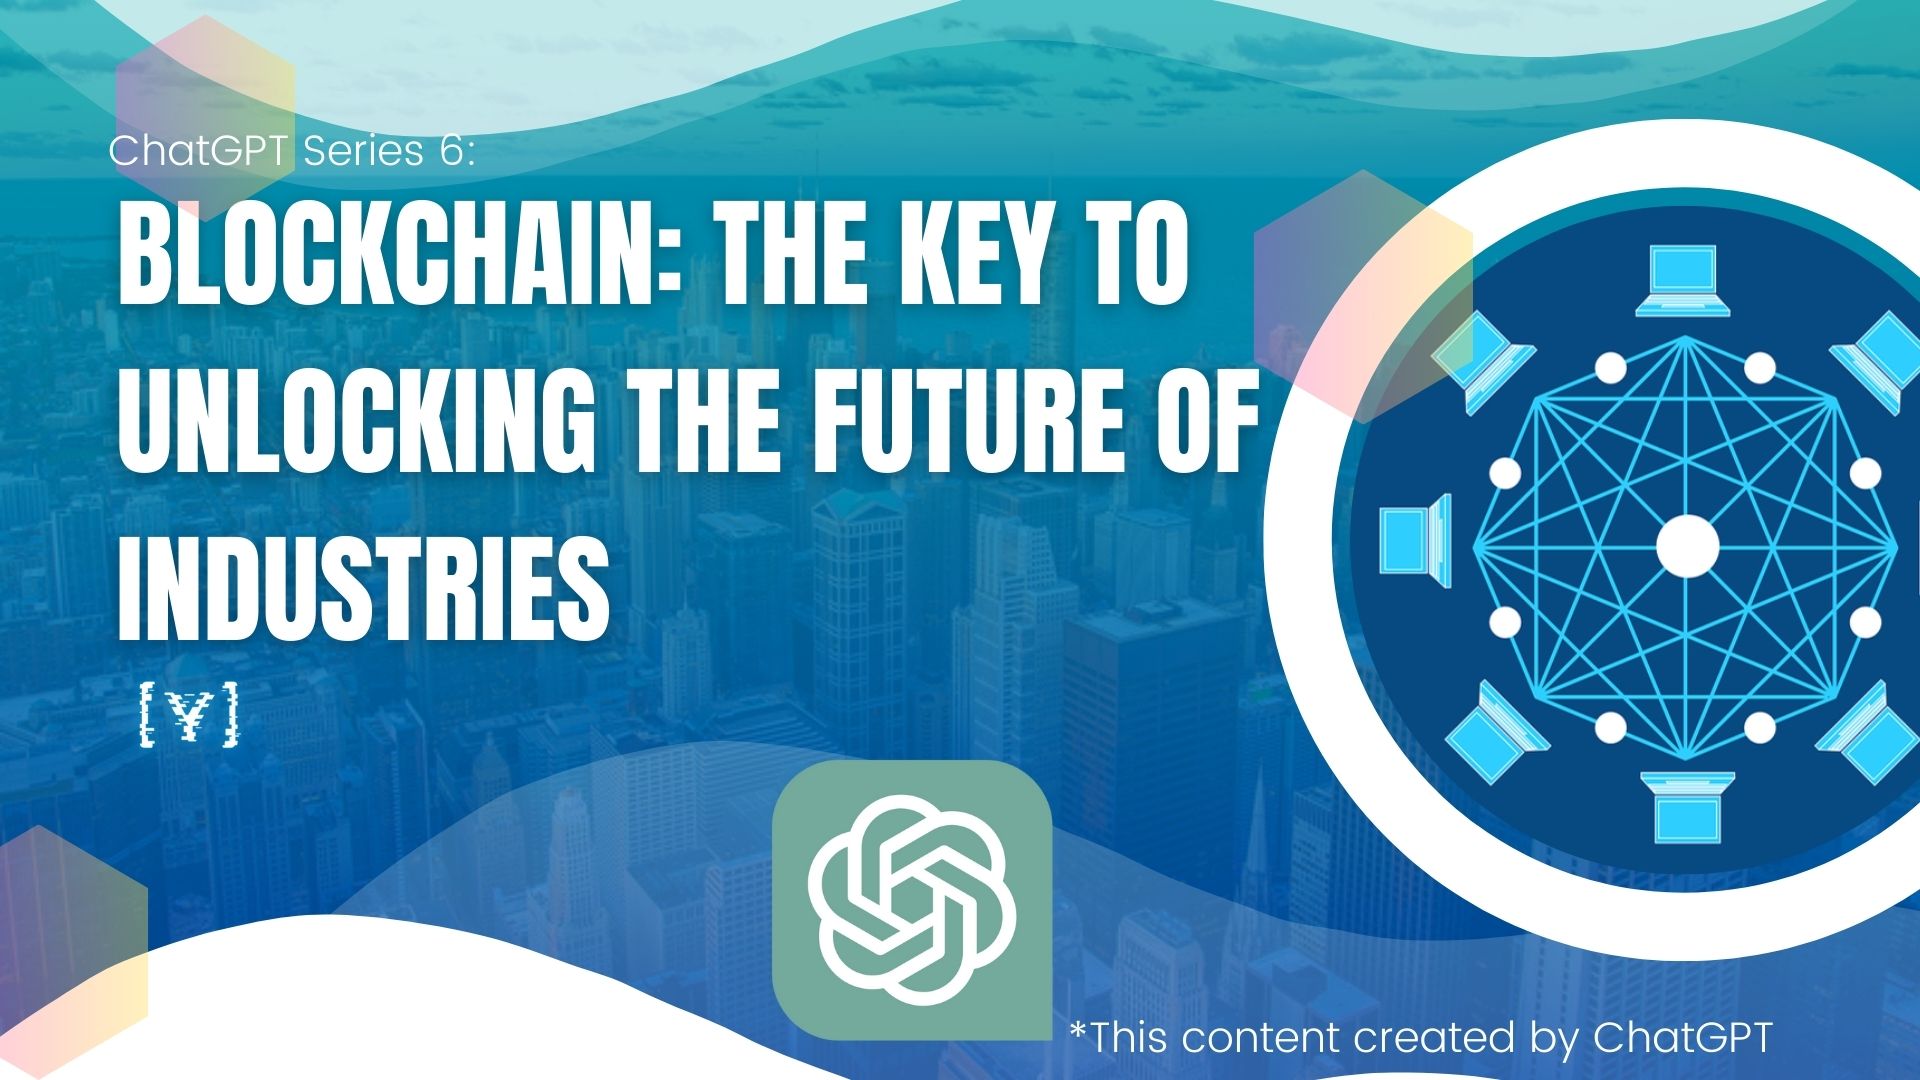 Blockchain: The Key to Unlocking the Future of Industries